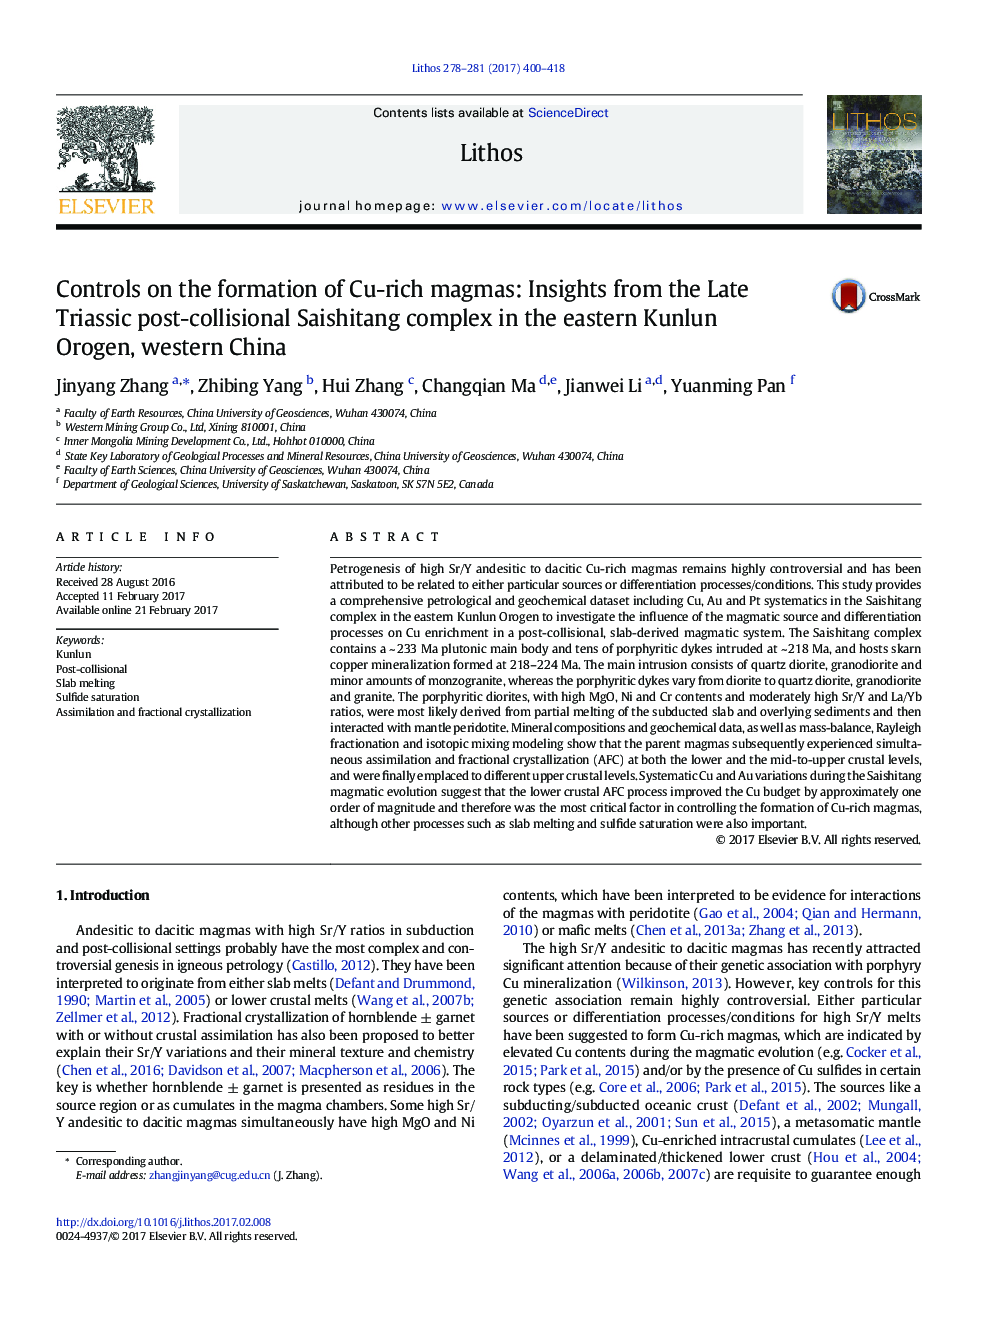 Controls on the formation of Cu-rich magmas: Insights from the Late Triassic post-collisional Saishitang complex in the eastern Kunlun Orogen, western China